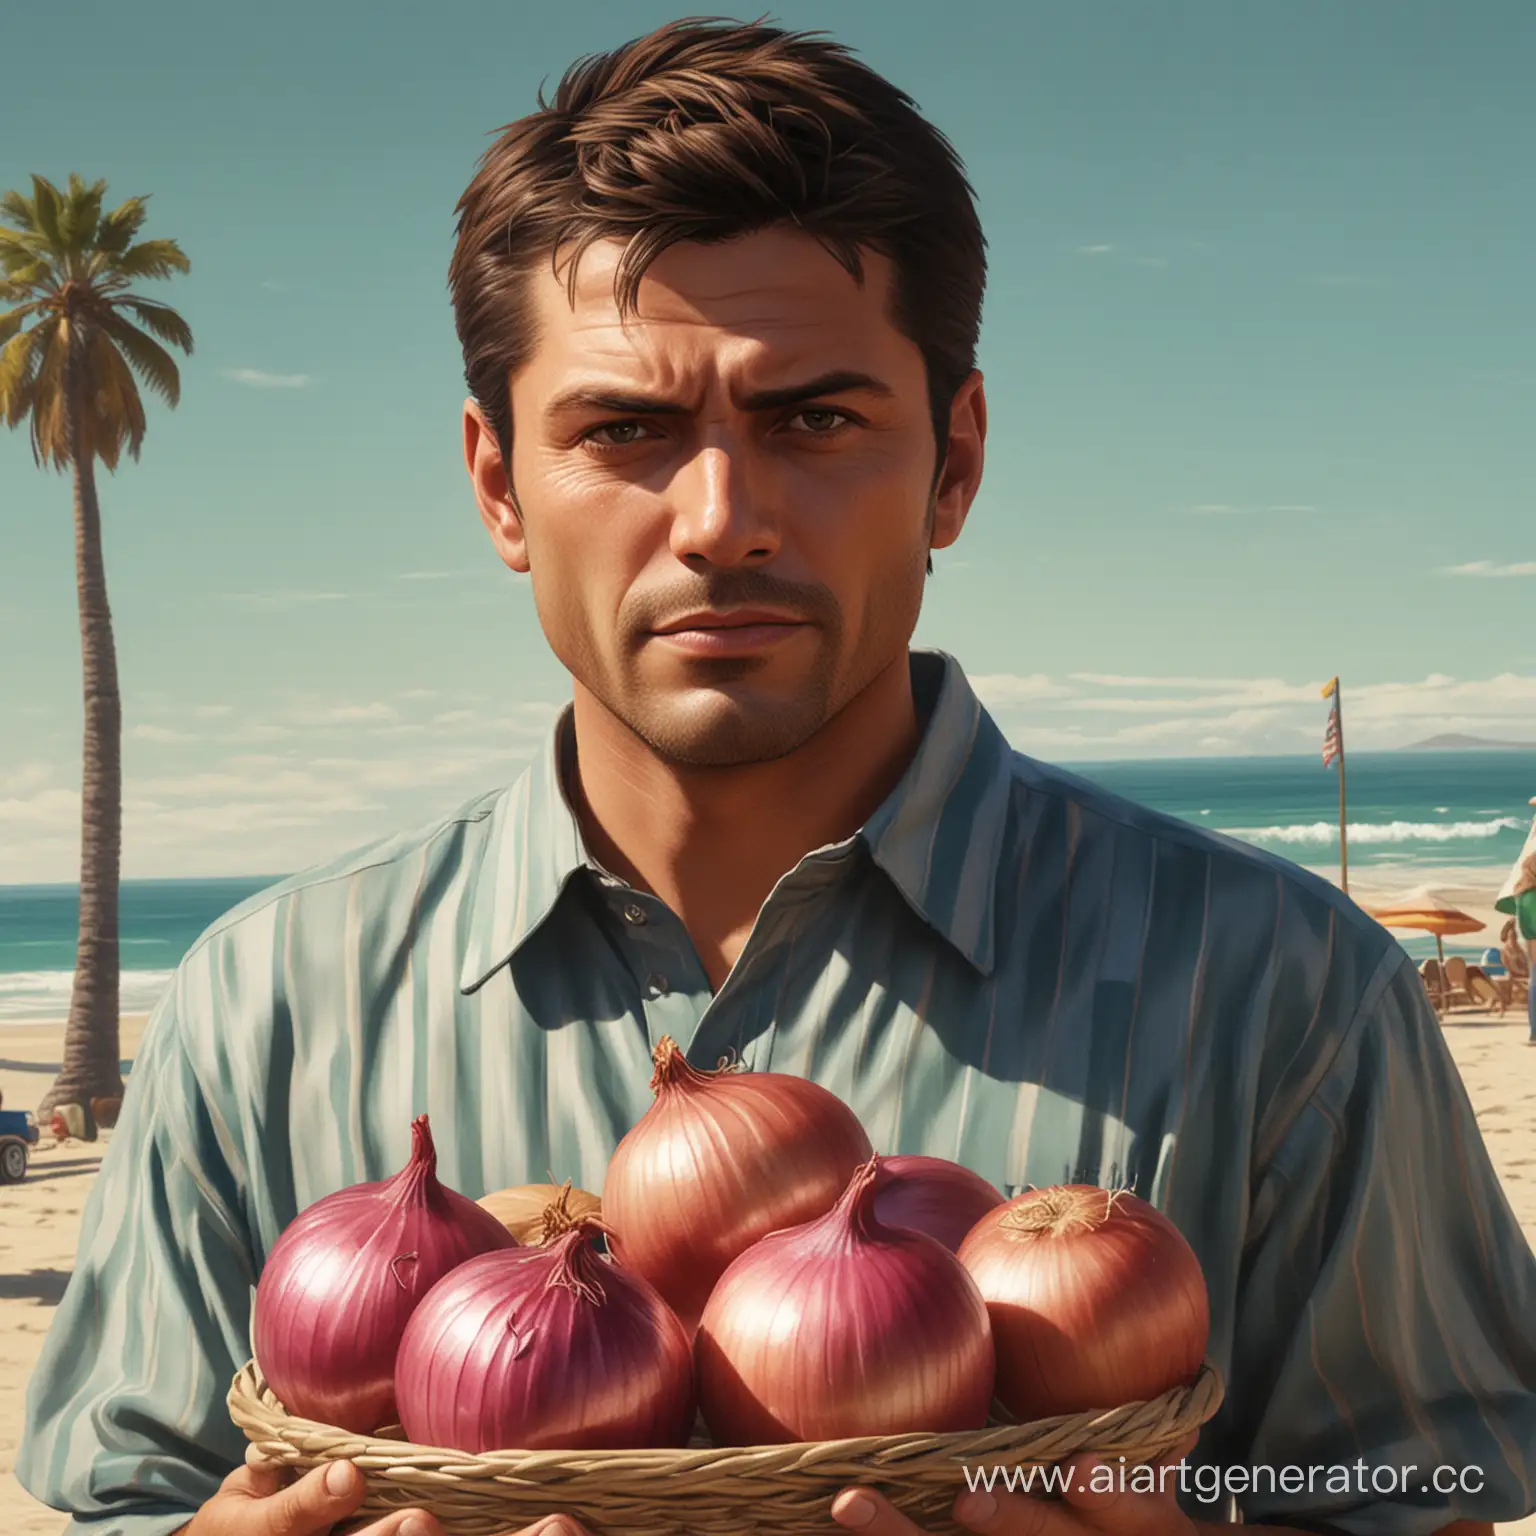 Man-in-Retro-Outfit-Holding-Onions